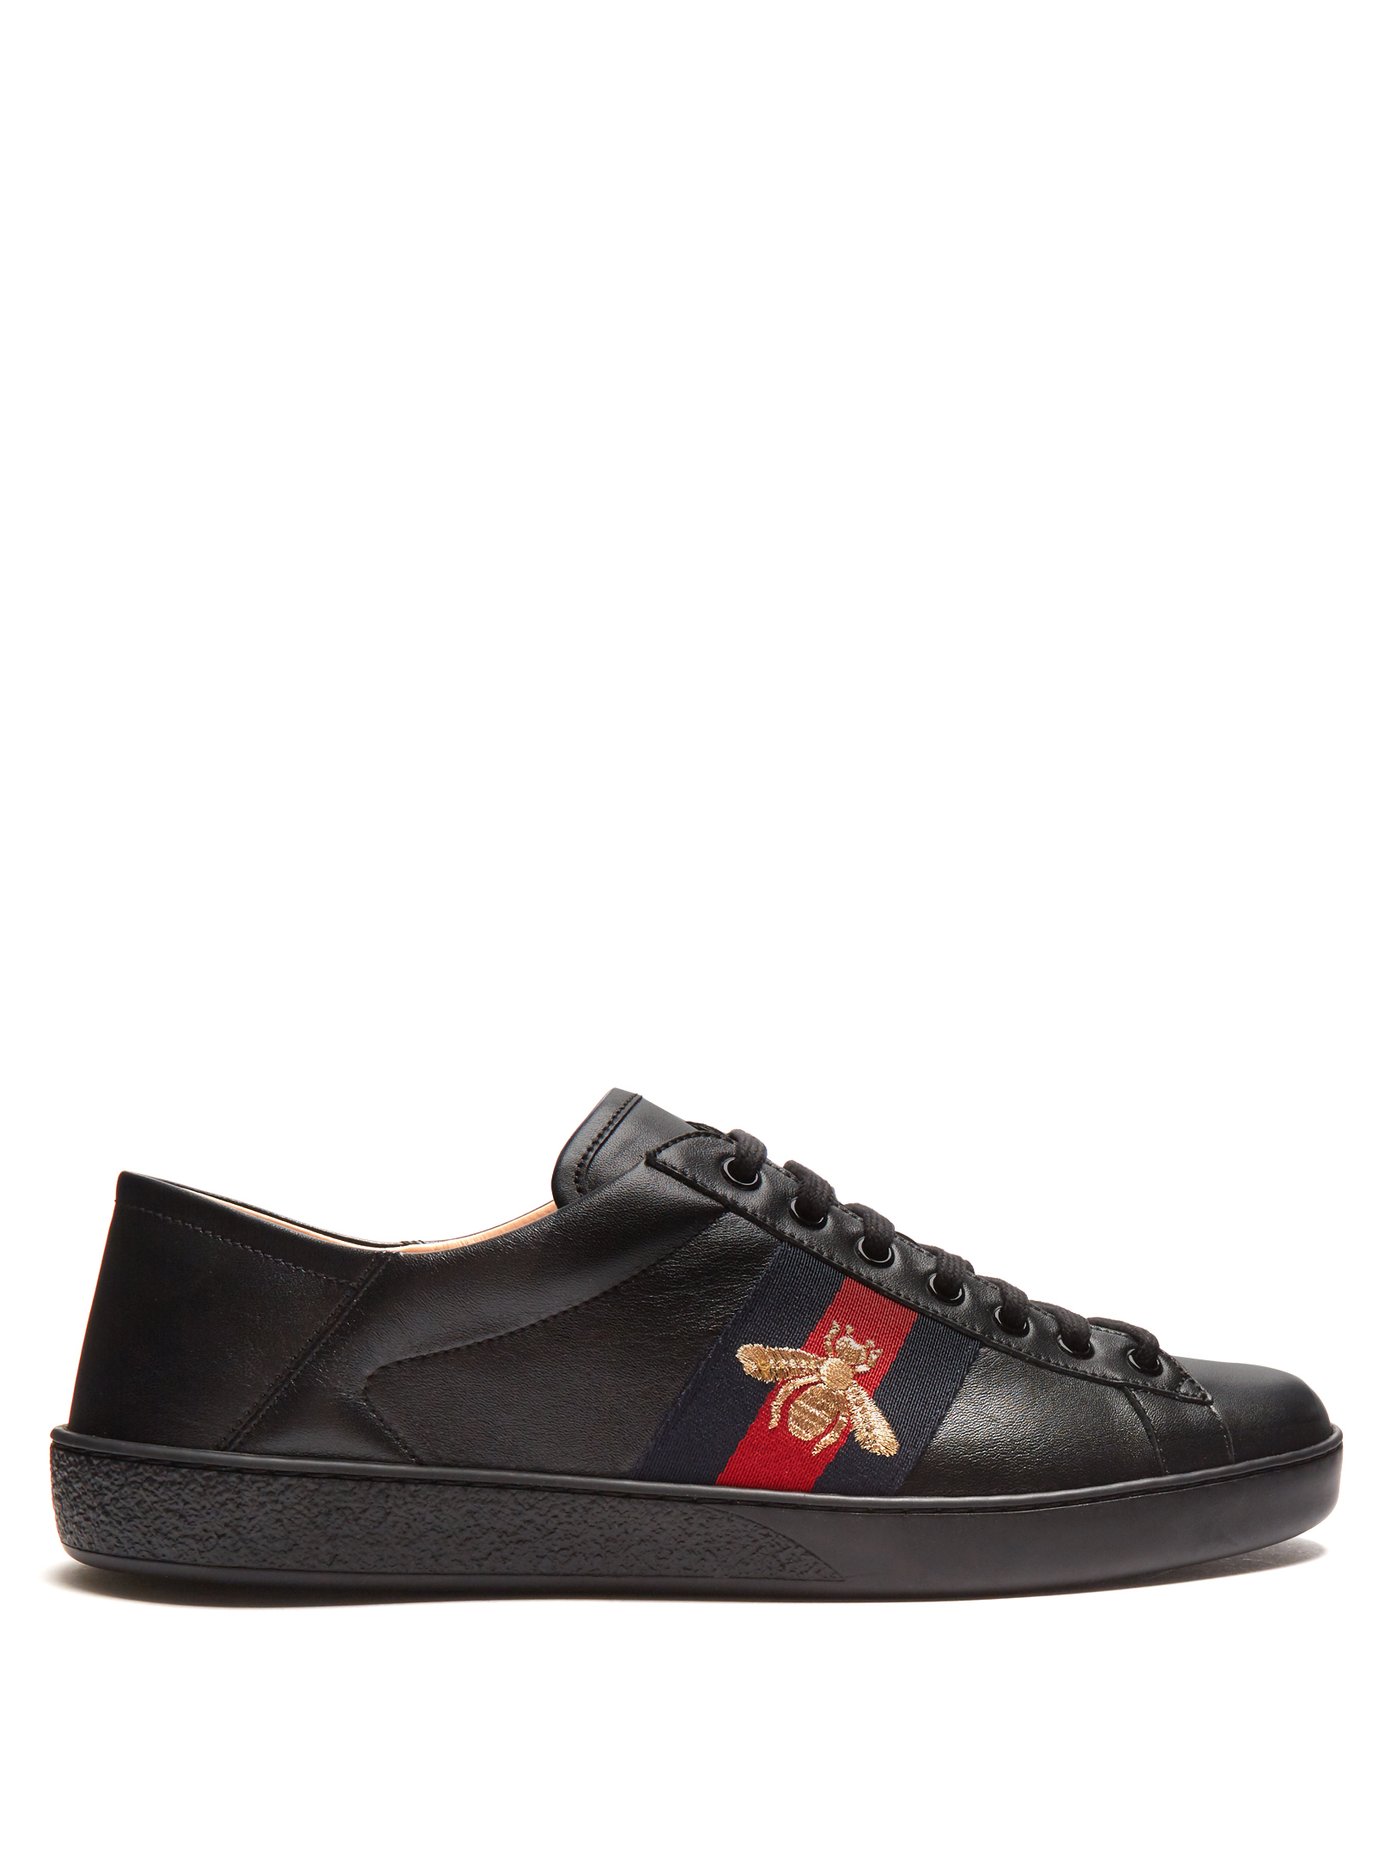 gucci ace leather trainers